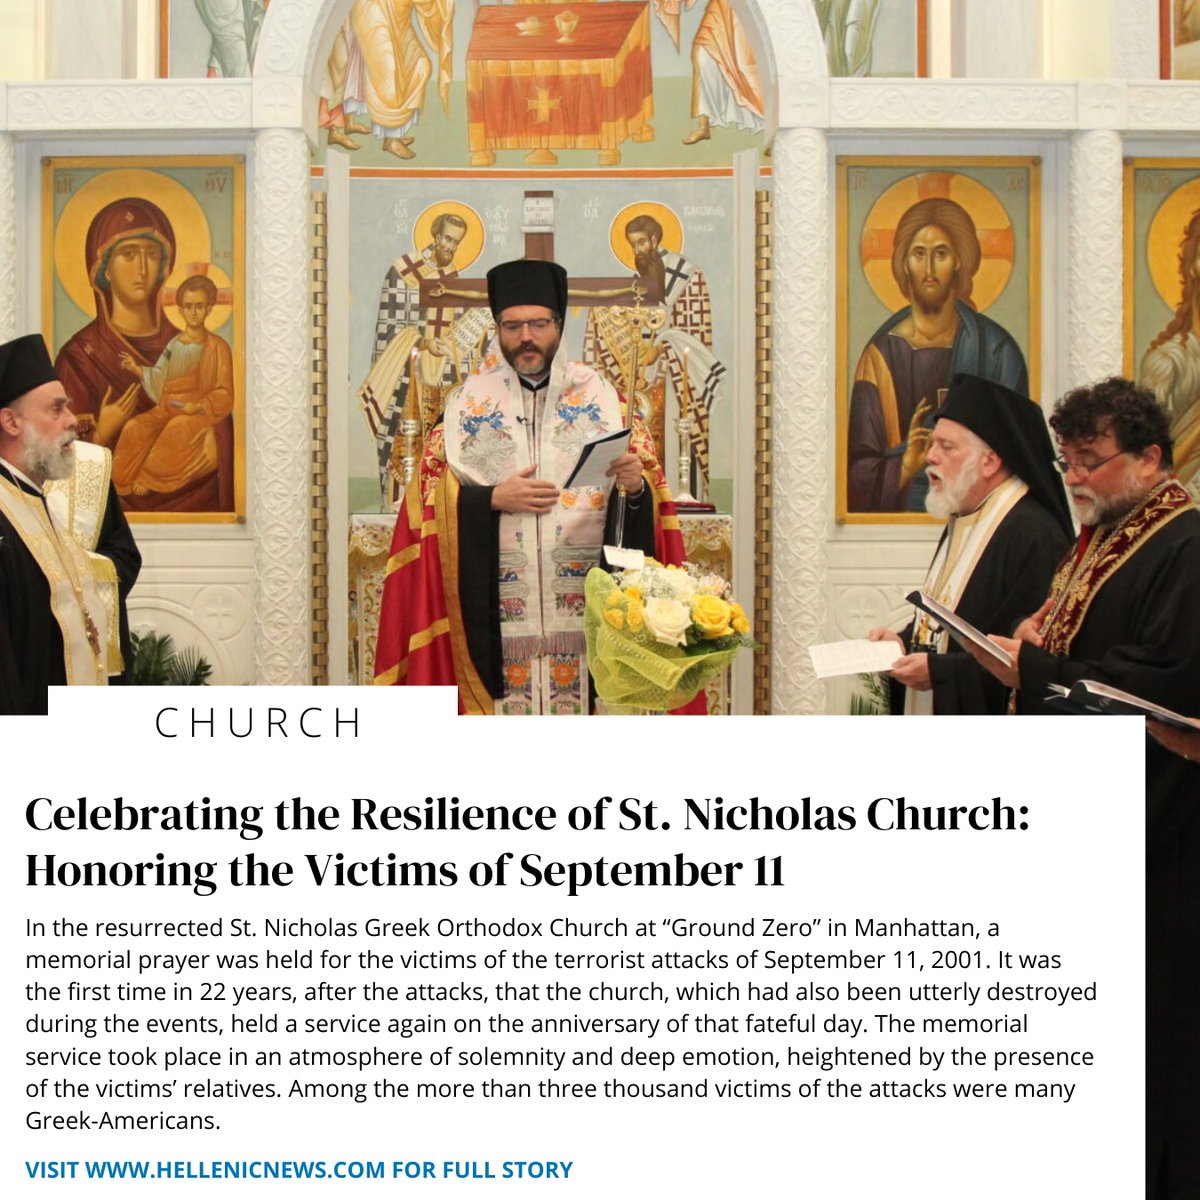 Rebuilt and rededicated, this beacon of hope and faith stands once again, serving as a testament to the enduring spirit of our community and the nation. l8r.it/PfFk #StNicholasChurch #September11 #Resilience #Hope #CommunityStrength #HellenicNews